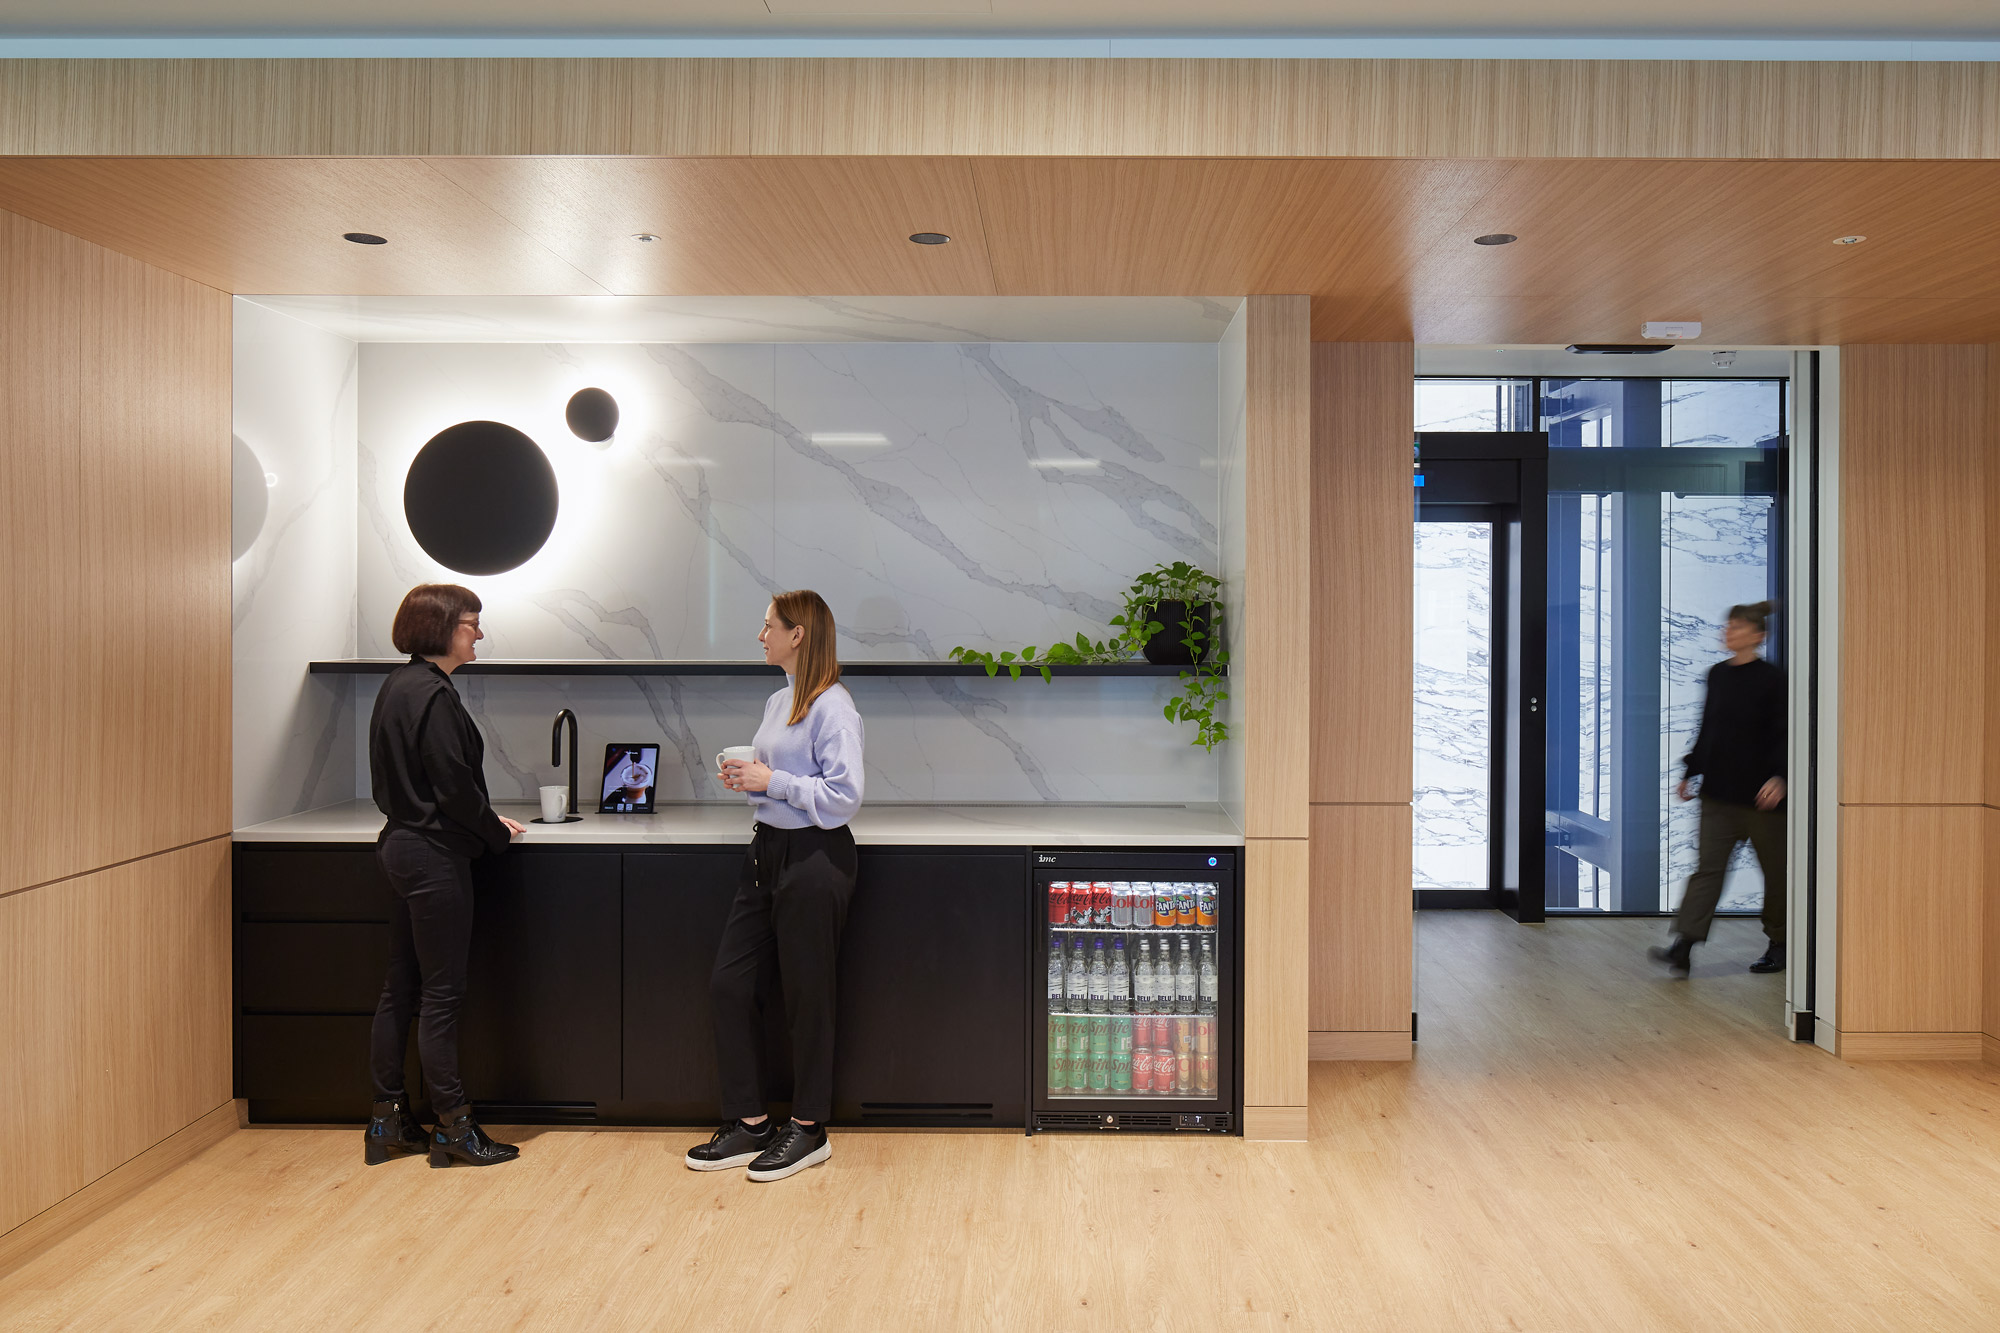 A modern office kitchenette, elegantly designed with a blend of natural wood and marble finishes. Two professionals are engaged in conversation by the countertop, which is set against a striking marble backsplash adorned with abstract black and white patterns. The space is accentuated by minimalist black cabinetry and a wooden archway framing the entrance. Soft lighting and a small plant add a welcoming touch, while a beverage fridge provides functionality, enhancing the comfort and usability of the area.